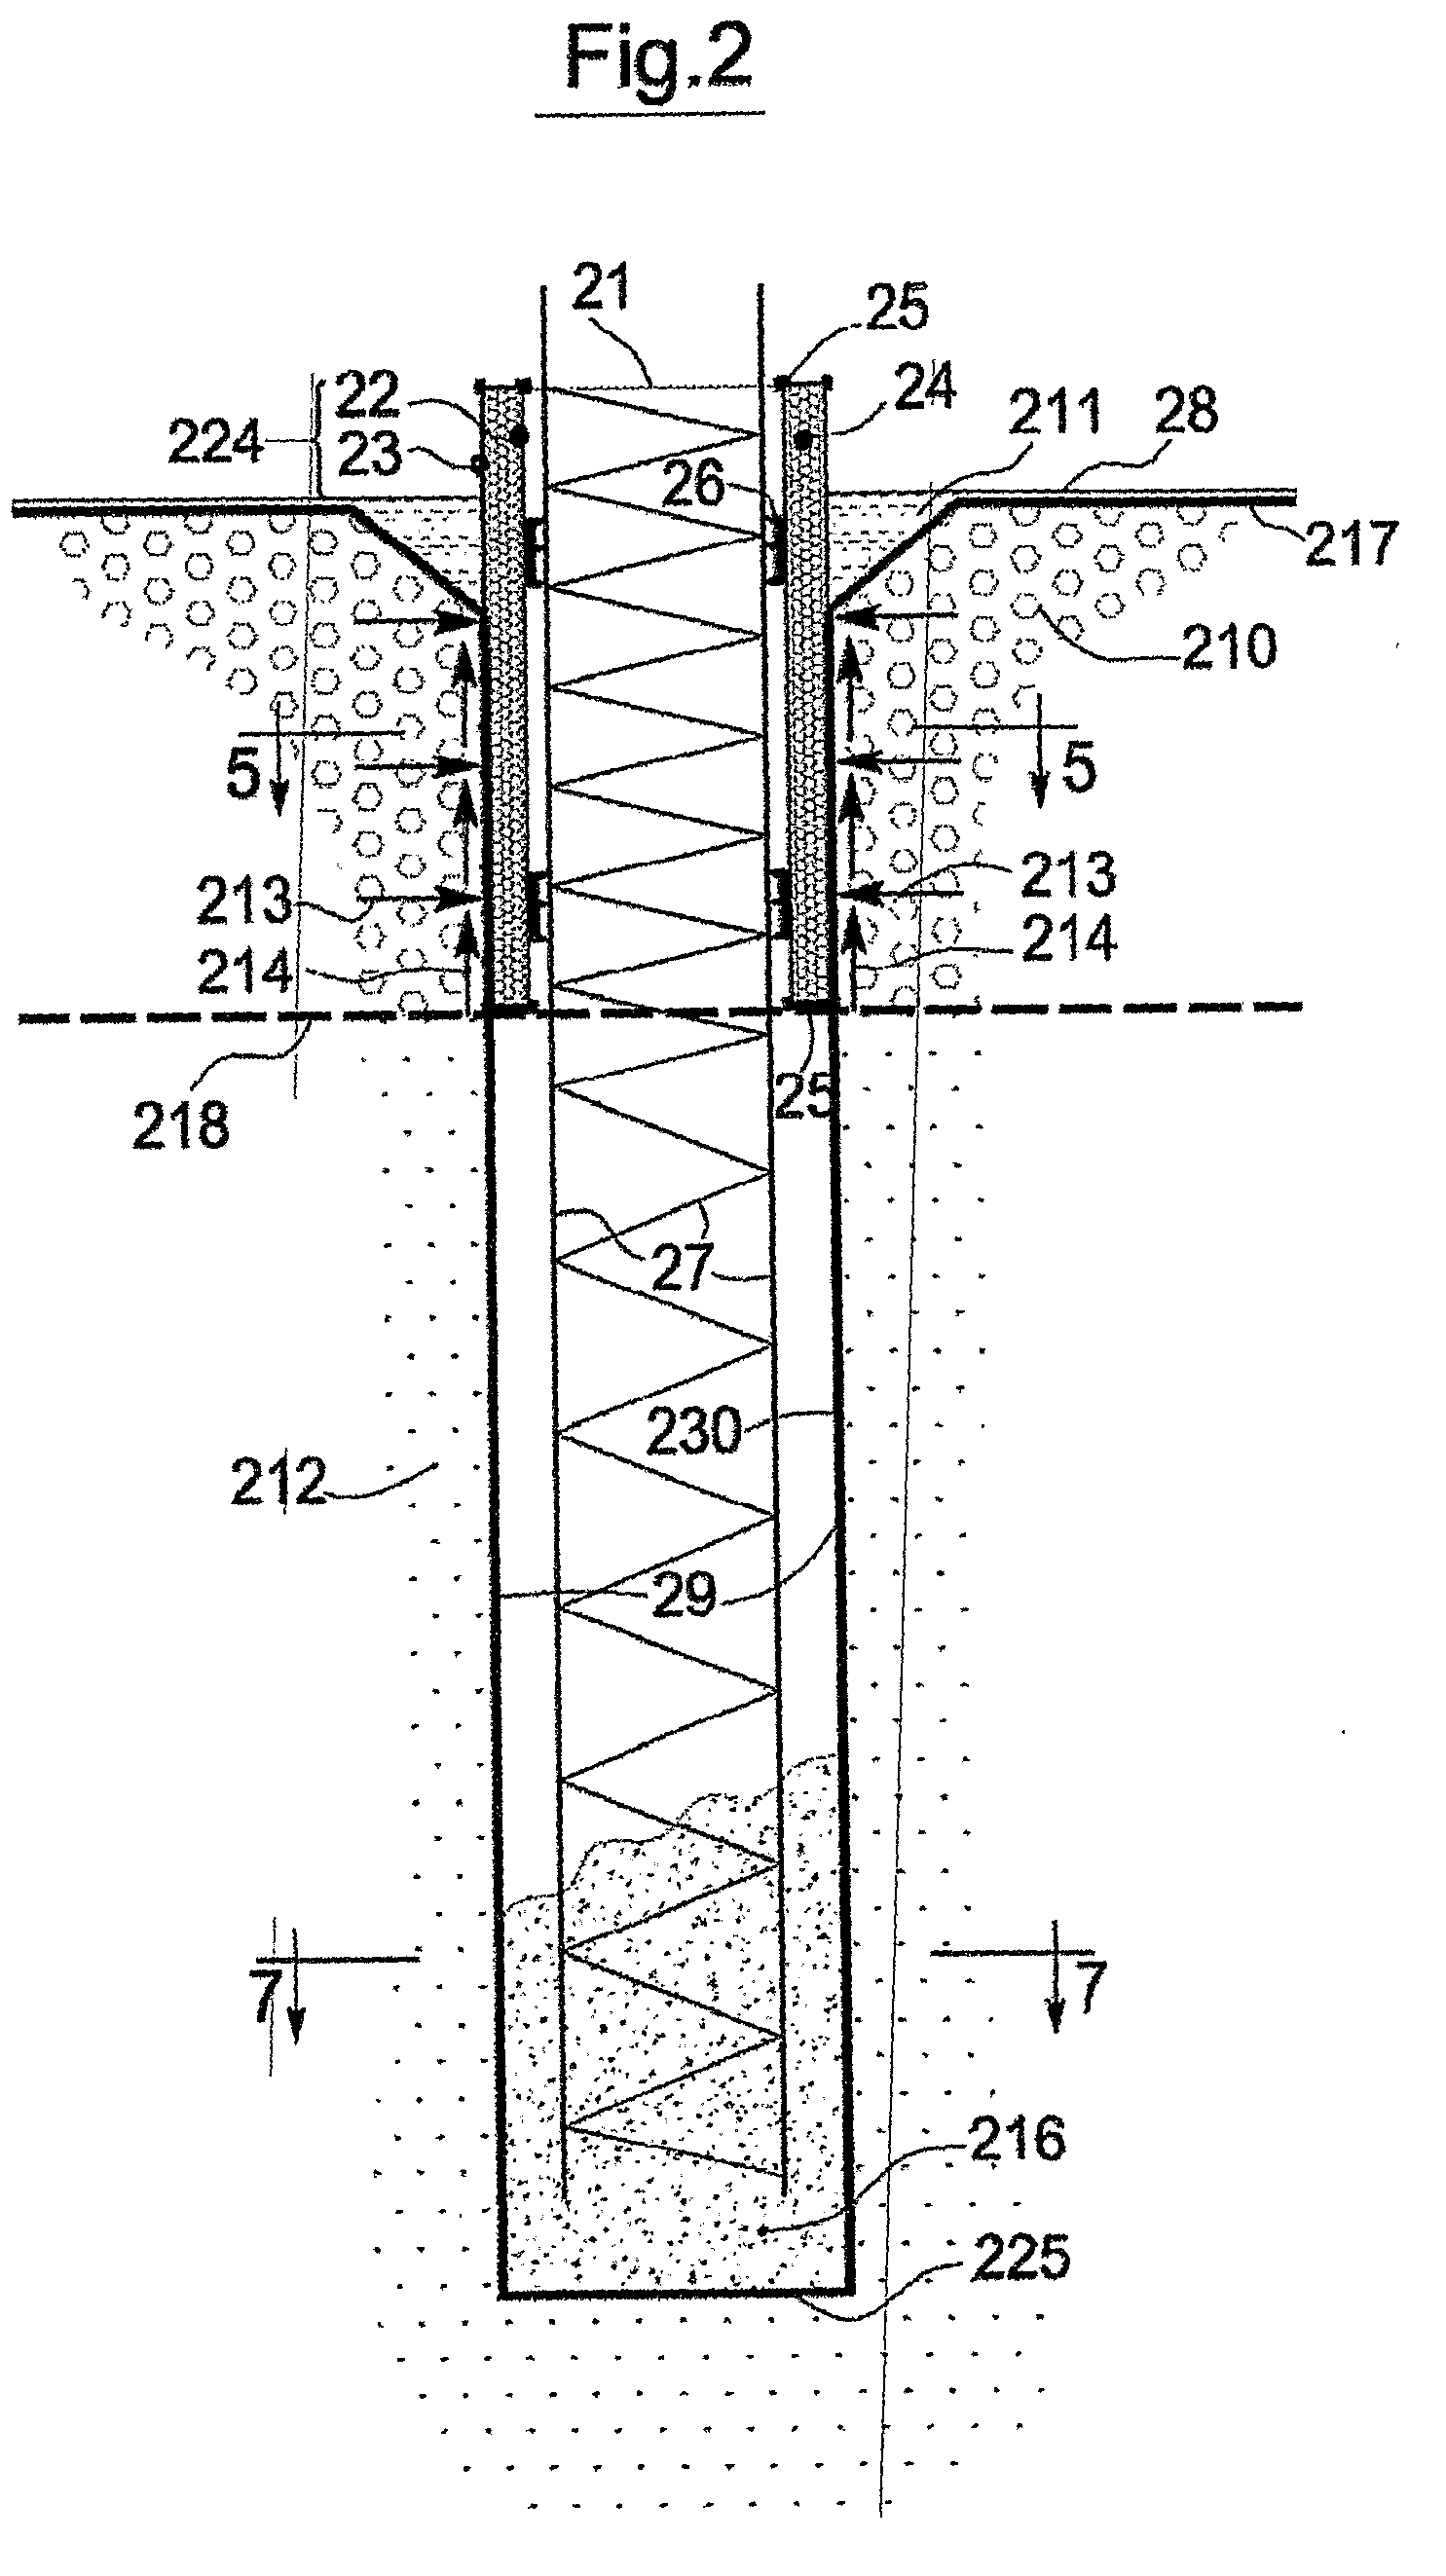 Device and Method for Improved Pile Casting